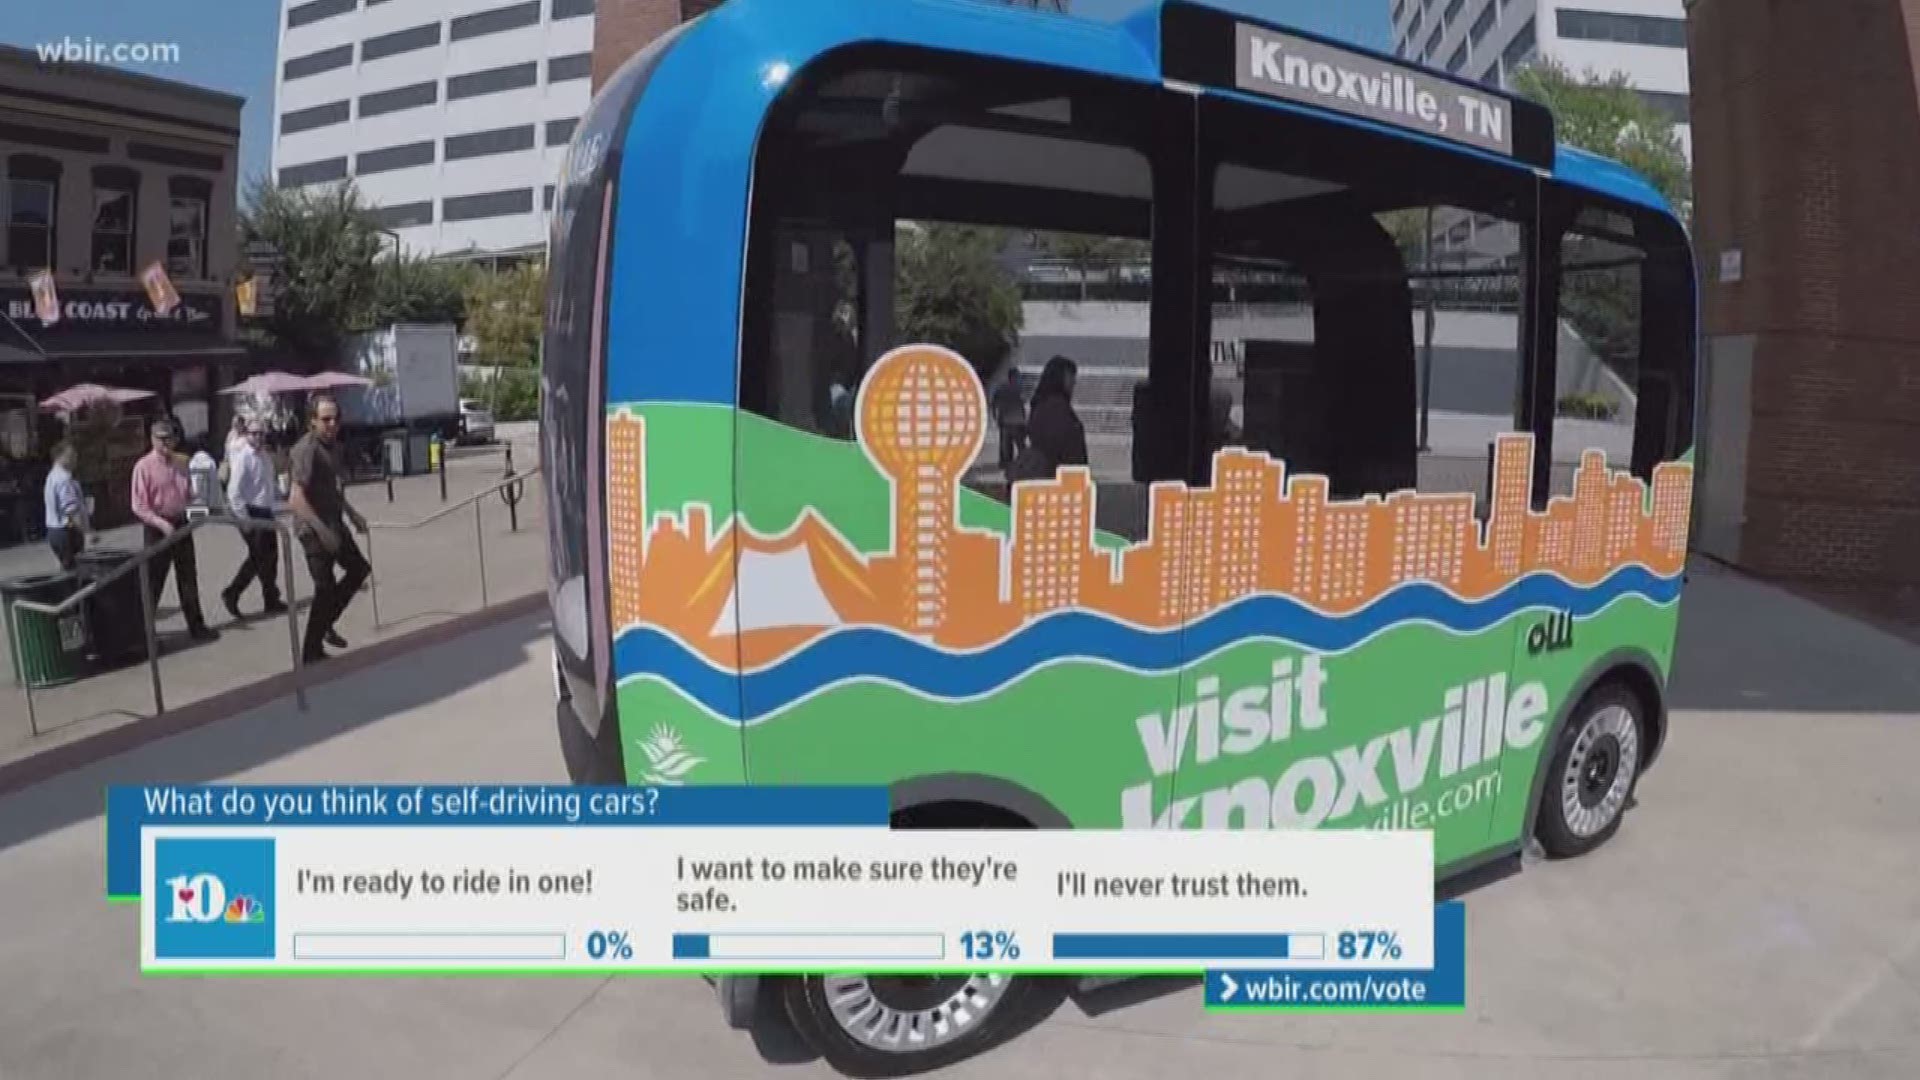 Imagine cruising through World's Fair Park or catching a ride home from a UT football game in a car without a driver. Soon, it may be a reality.